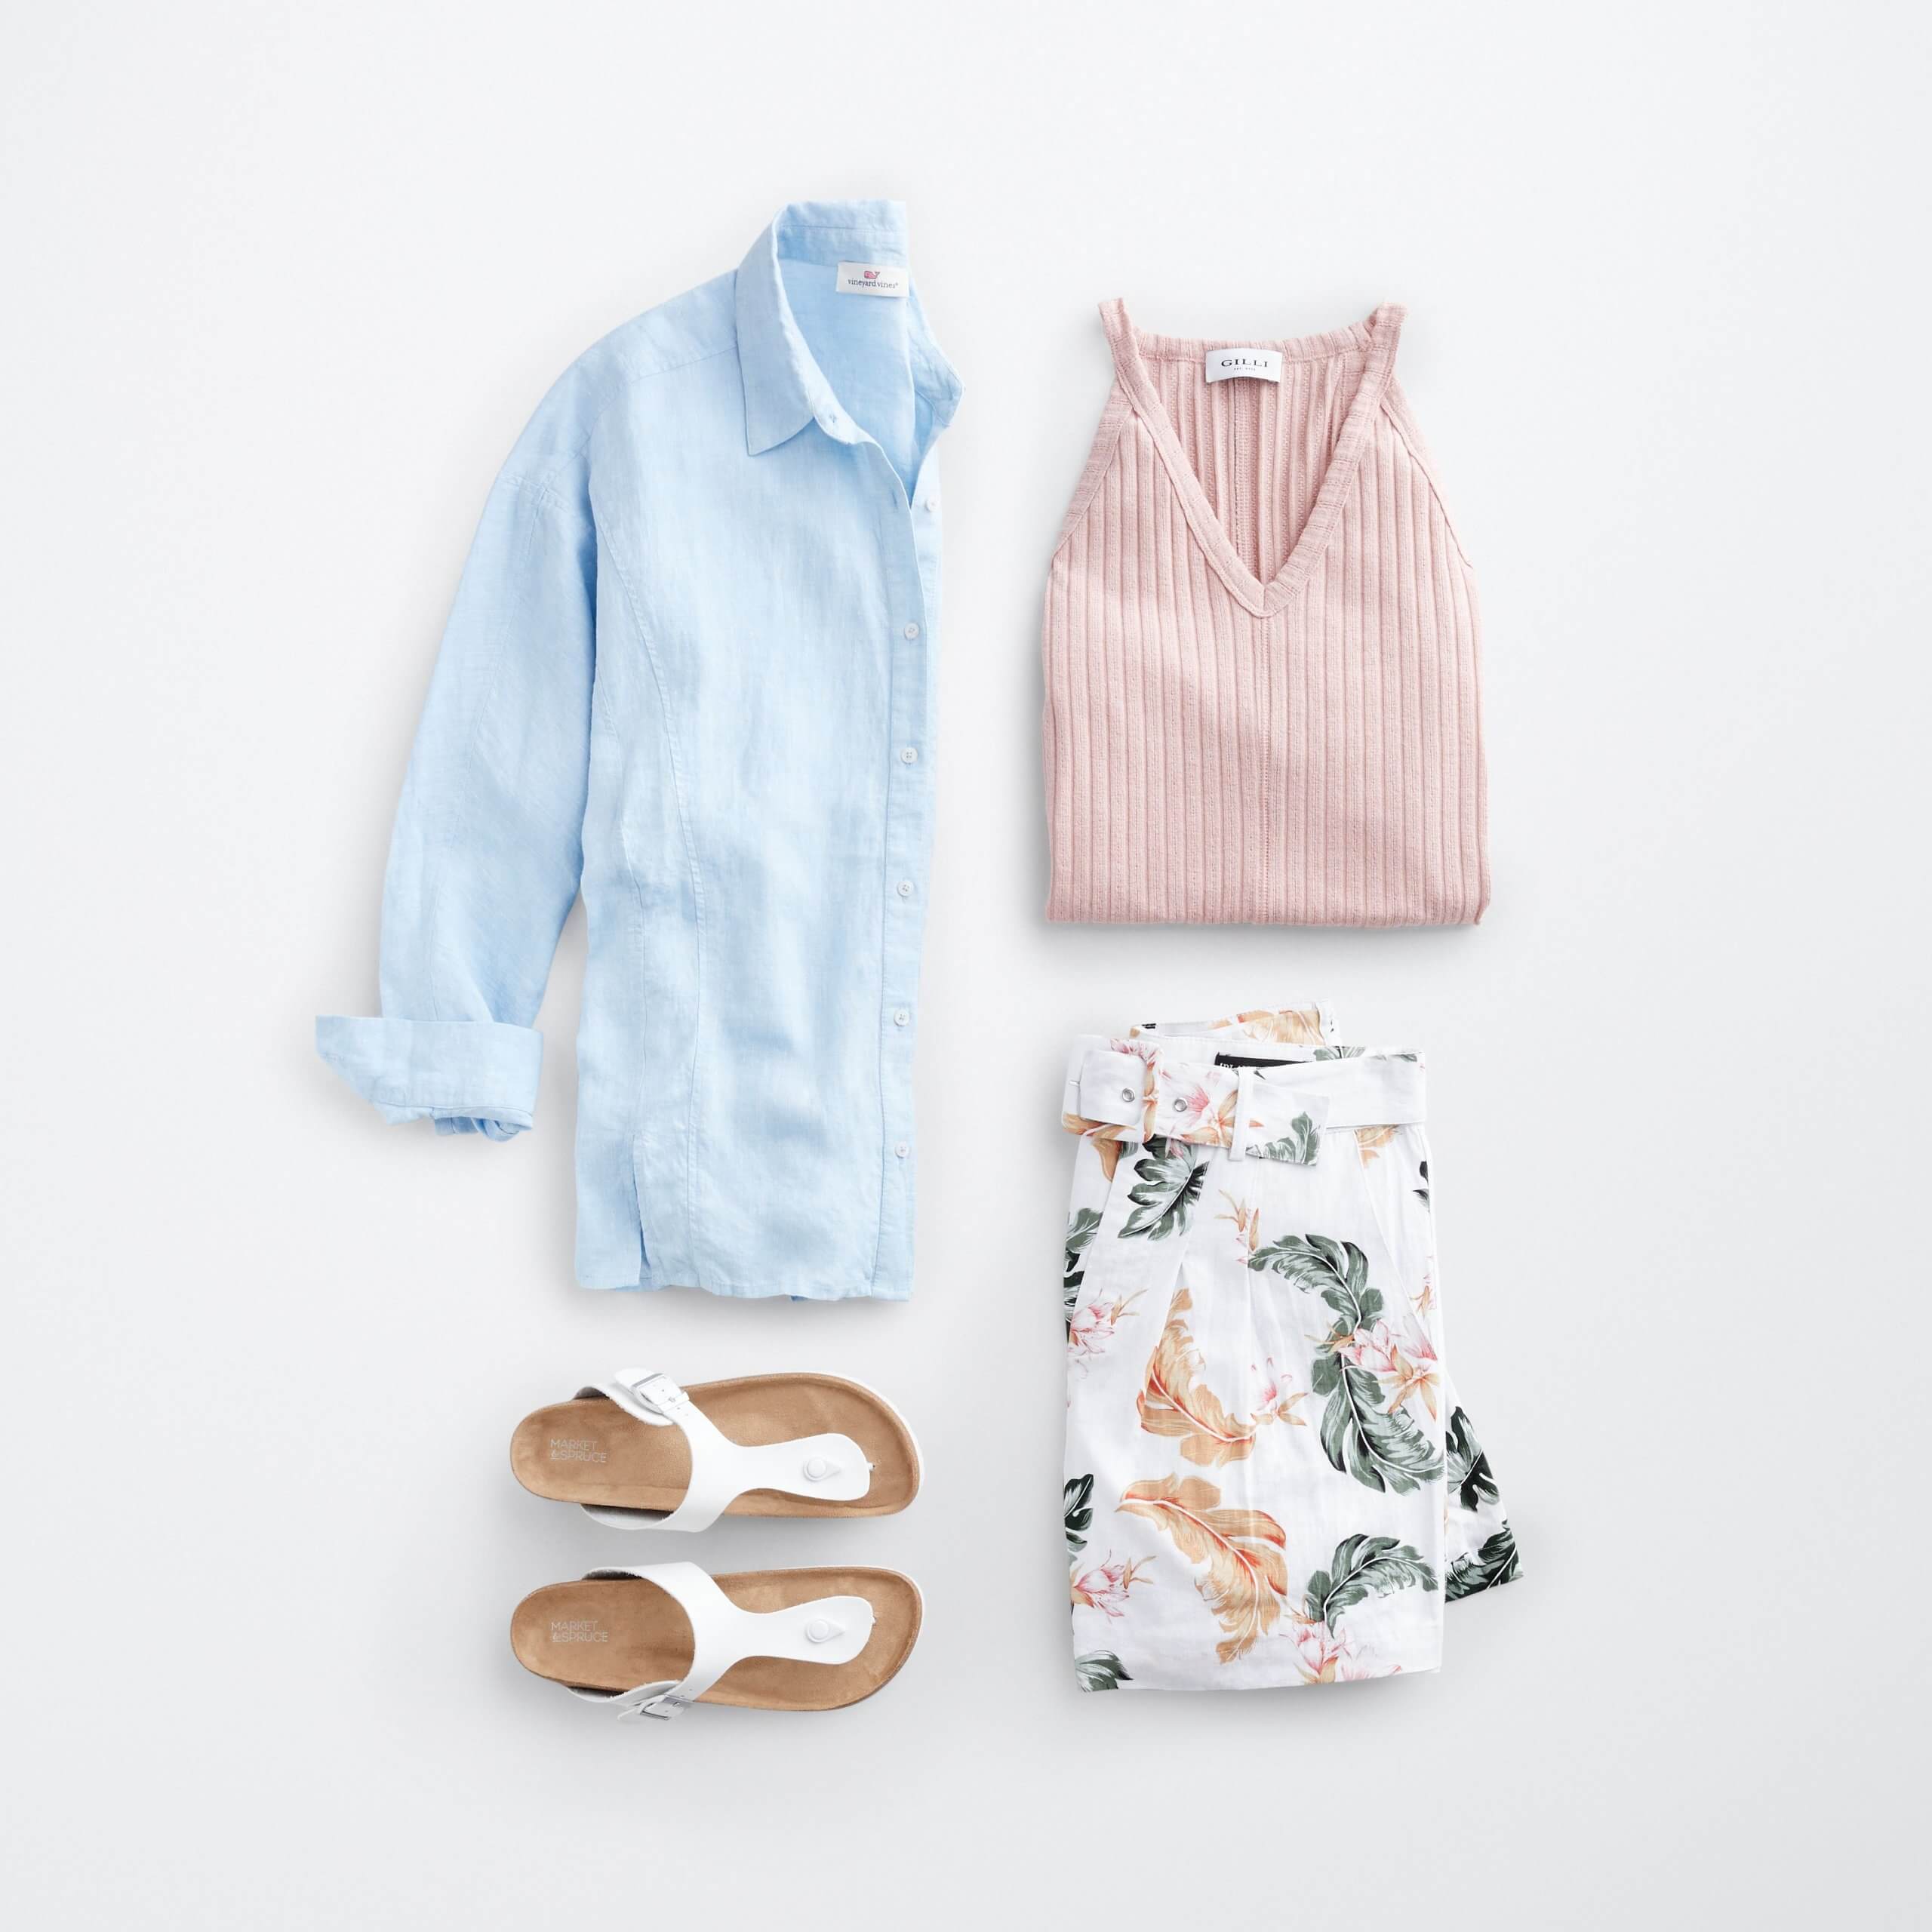 Stitch Fix Women’s outfit laydown featuring a blue button-front shirt, light pink tank top, floral linen shorts and white sandals.